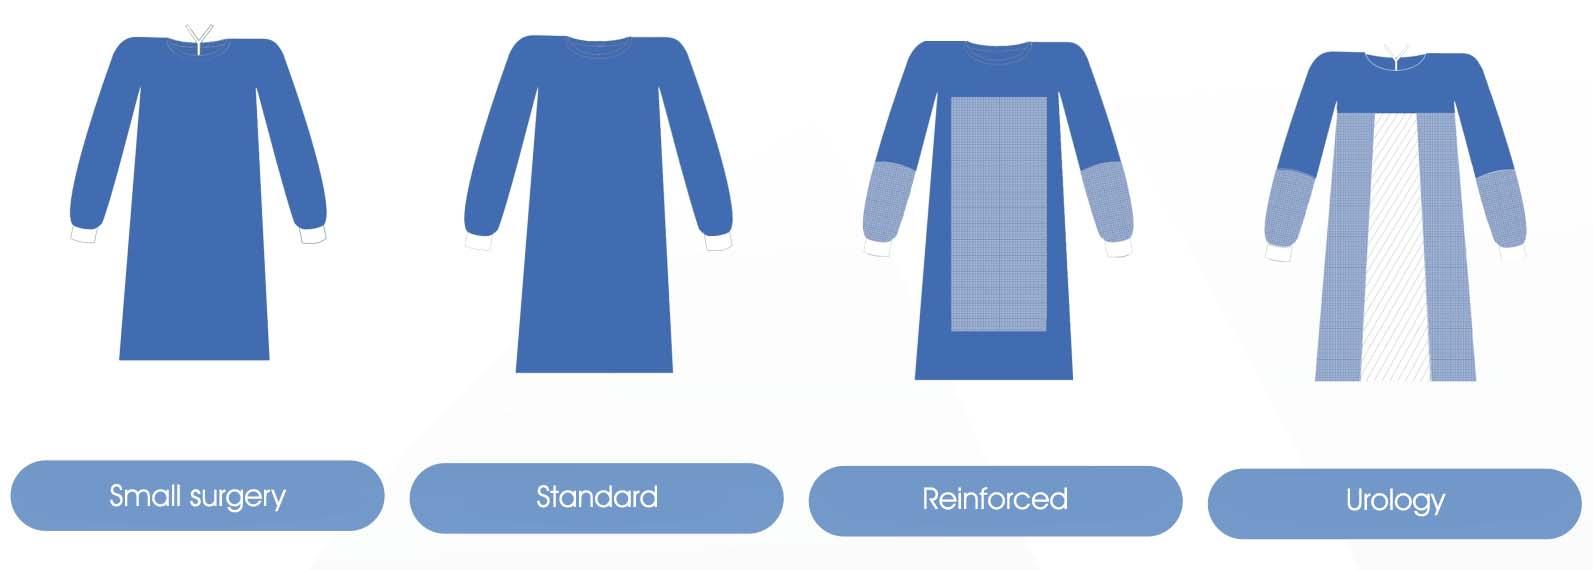 Types of surgical gowns